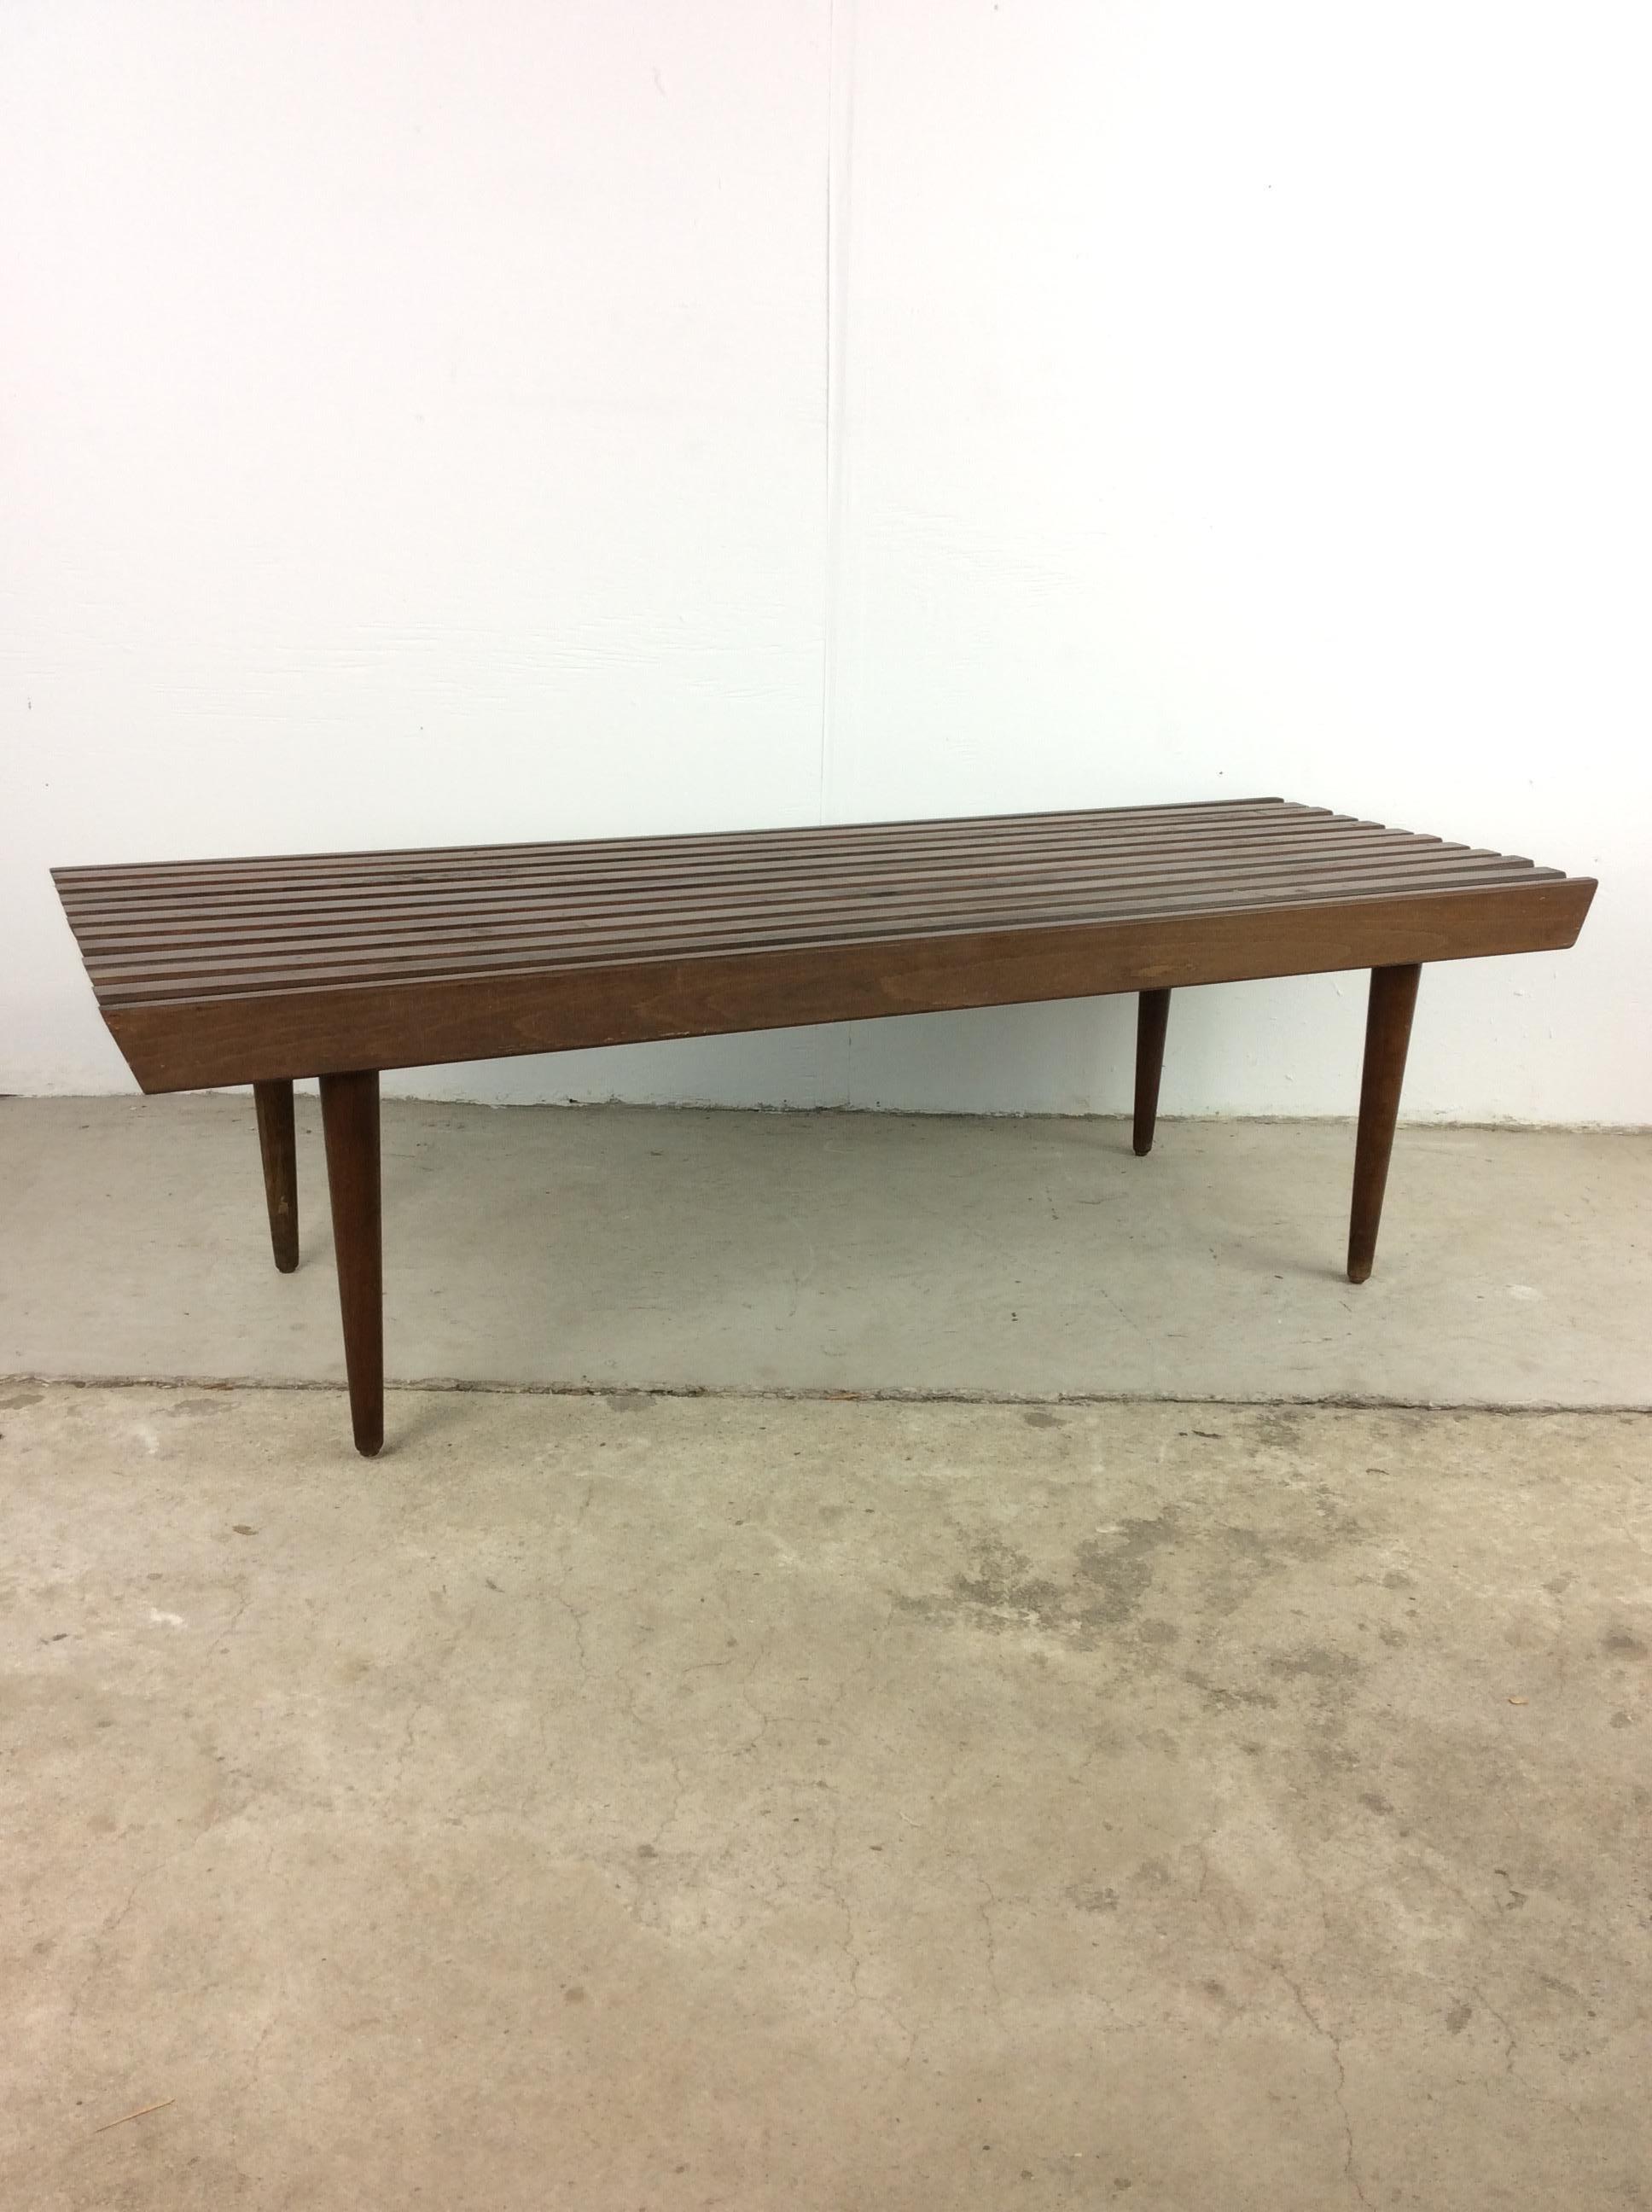 This mid century modern slat bench / coffee table in the style of Adrian Pearsall for Craft Associates features hardwood construction, original walnut finish, and tall tapered legs. 

Matching slat end table available separately. Complimentary